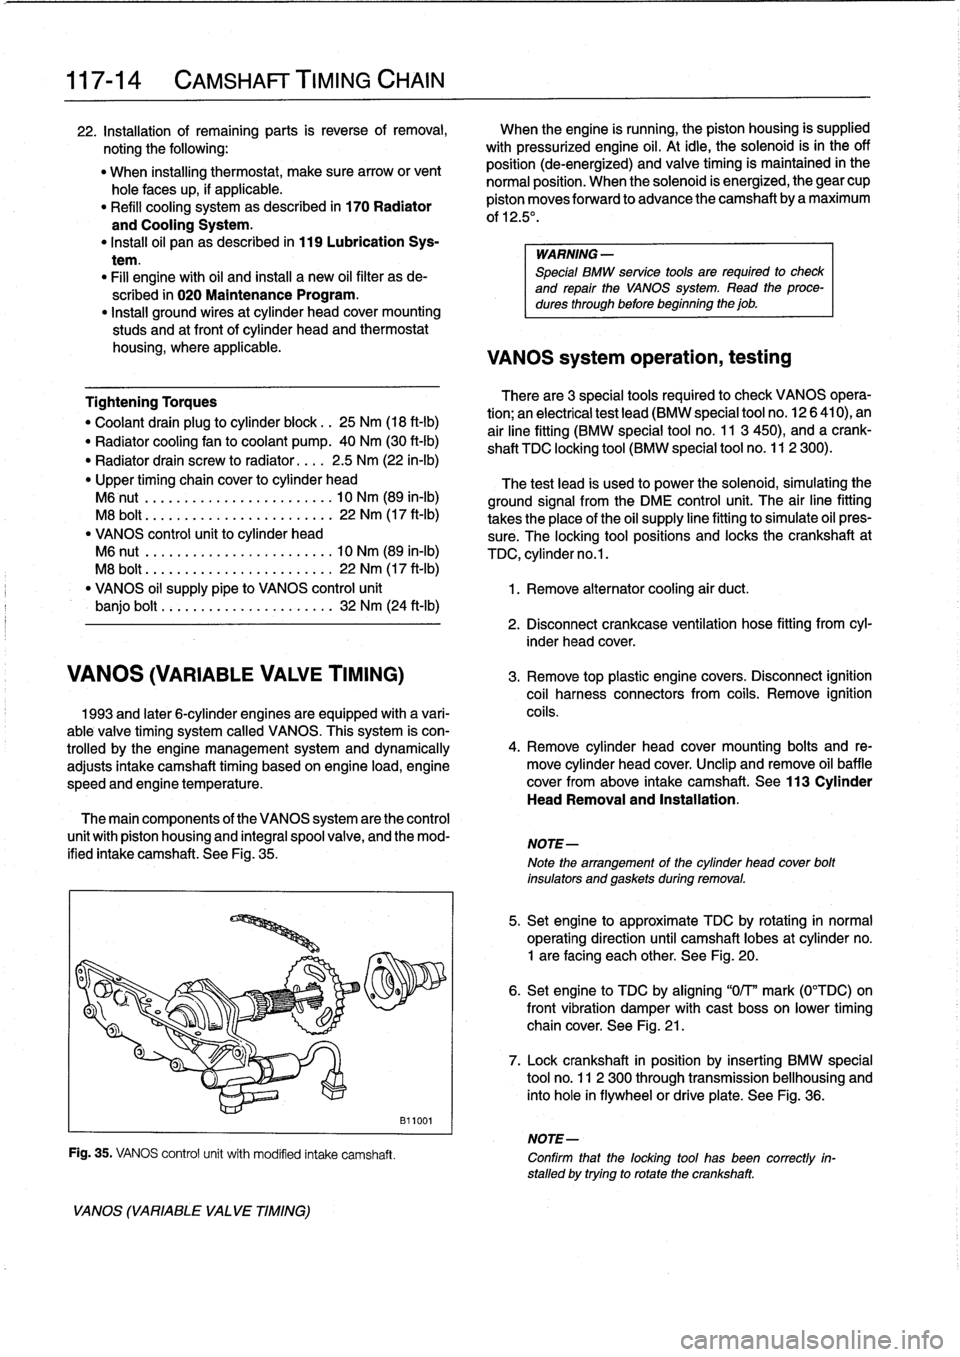 BMW M3 1993 E36 Service Manual 
117-
1
4

	

CAMSHAFT
TIMING
CHAIN

22
.
Installation
of
remaining
parts
is
reverse
of
removal,

	

When
theengine
is
running,
the
piston
housing
is
supplied

noting
the
following
:

	

with
pressuri